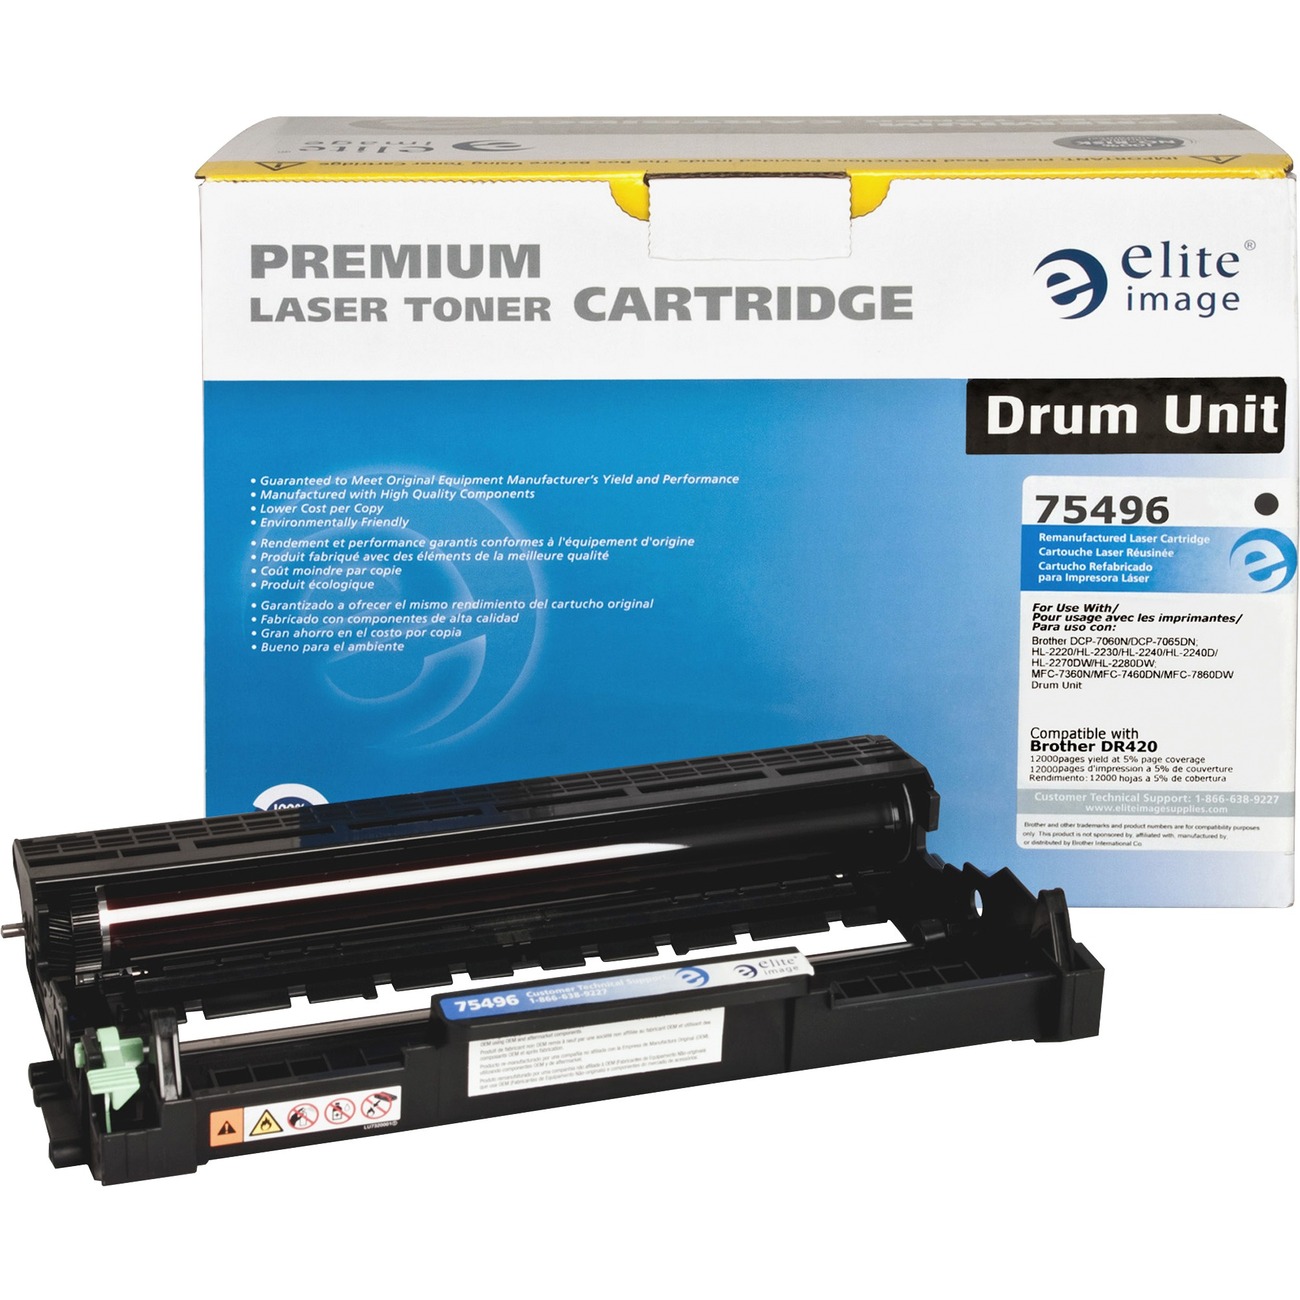 Brother MFC-7860DW Drum Unit made by Brother OEM Prints 12000 Pages